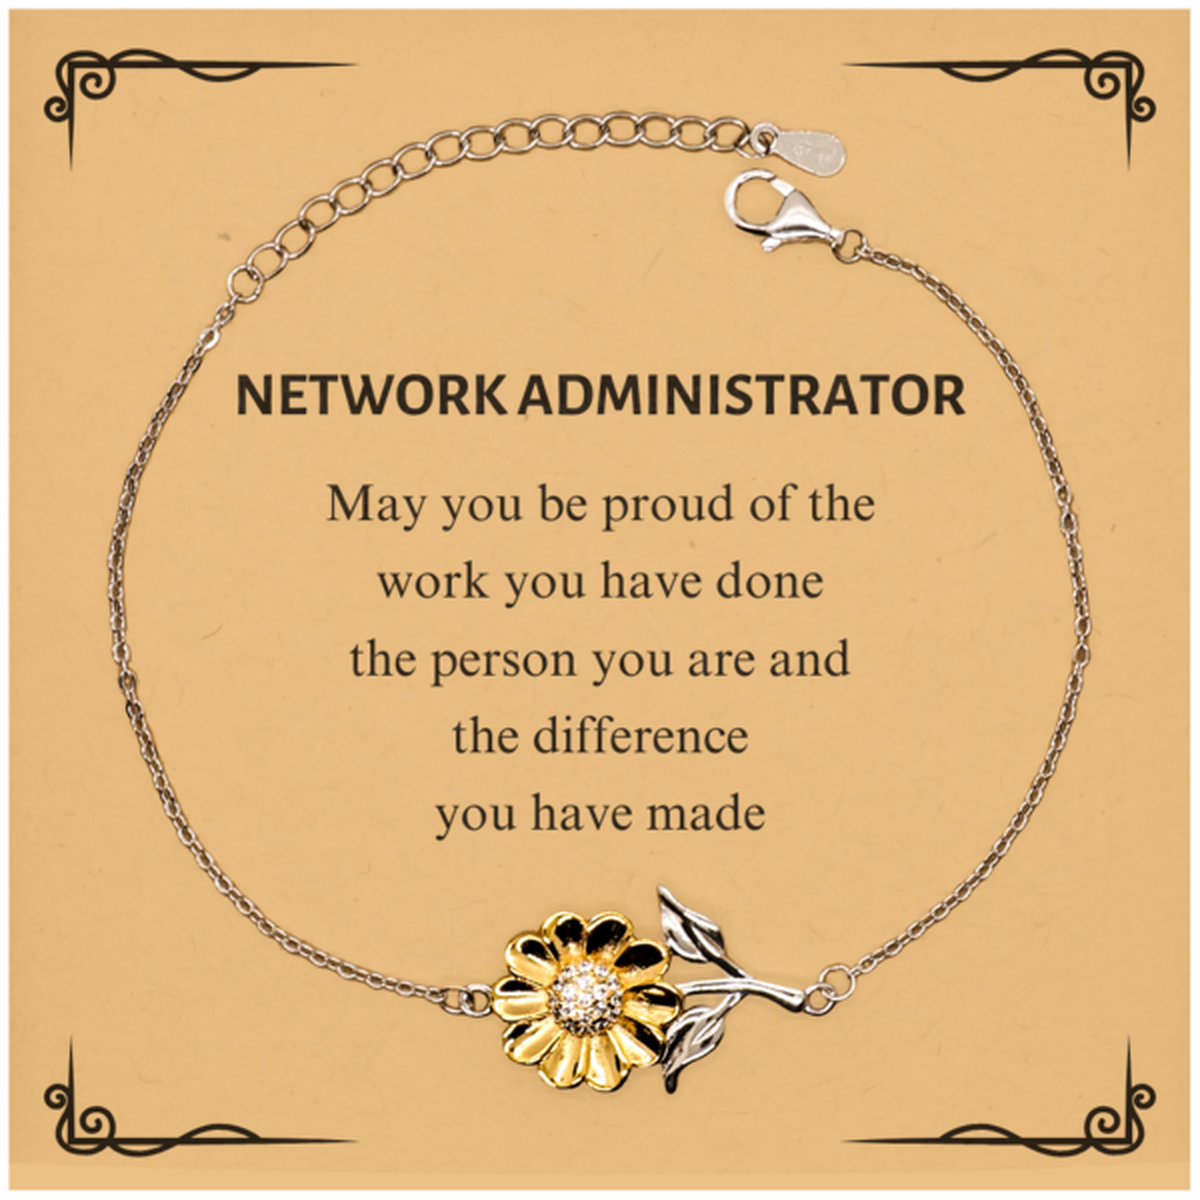 Network Administrator May you be proud of the work you have done, Retirement Network Administrator Sunflower Bracelet for Colleague Appreciation Gifts Amazing for Network Administrator